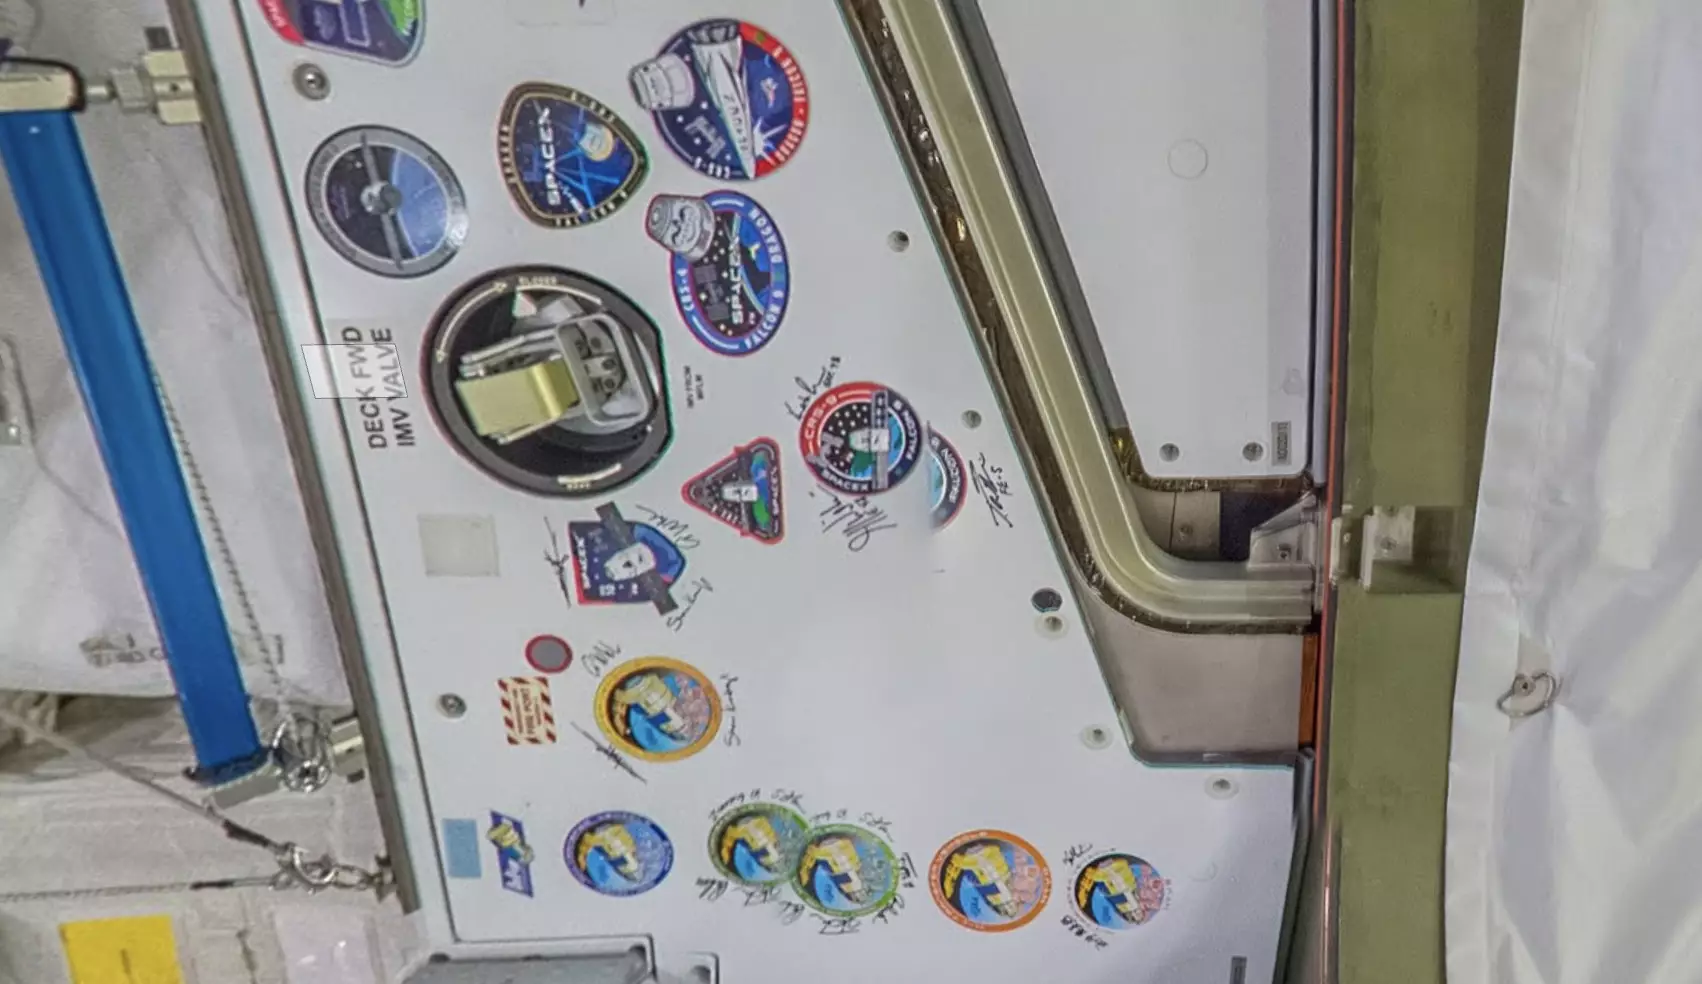 Google Maps Streetview inside the International Space Station '